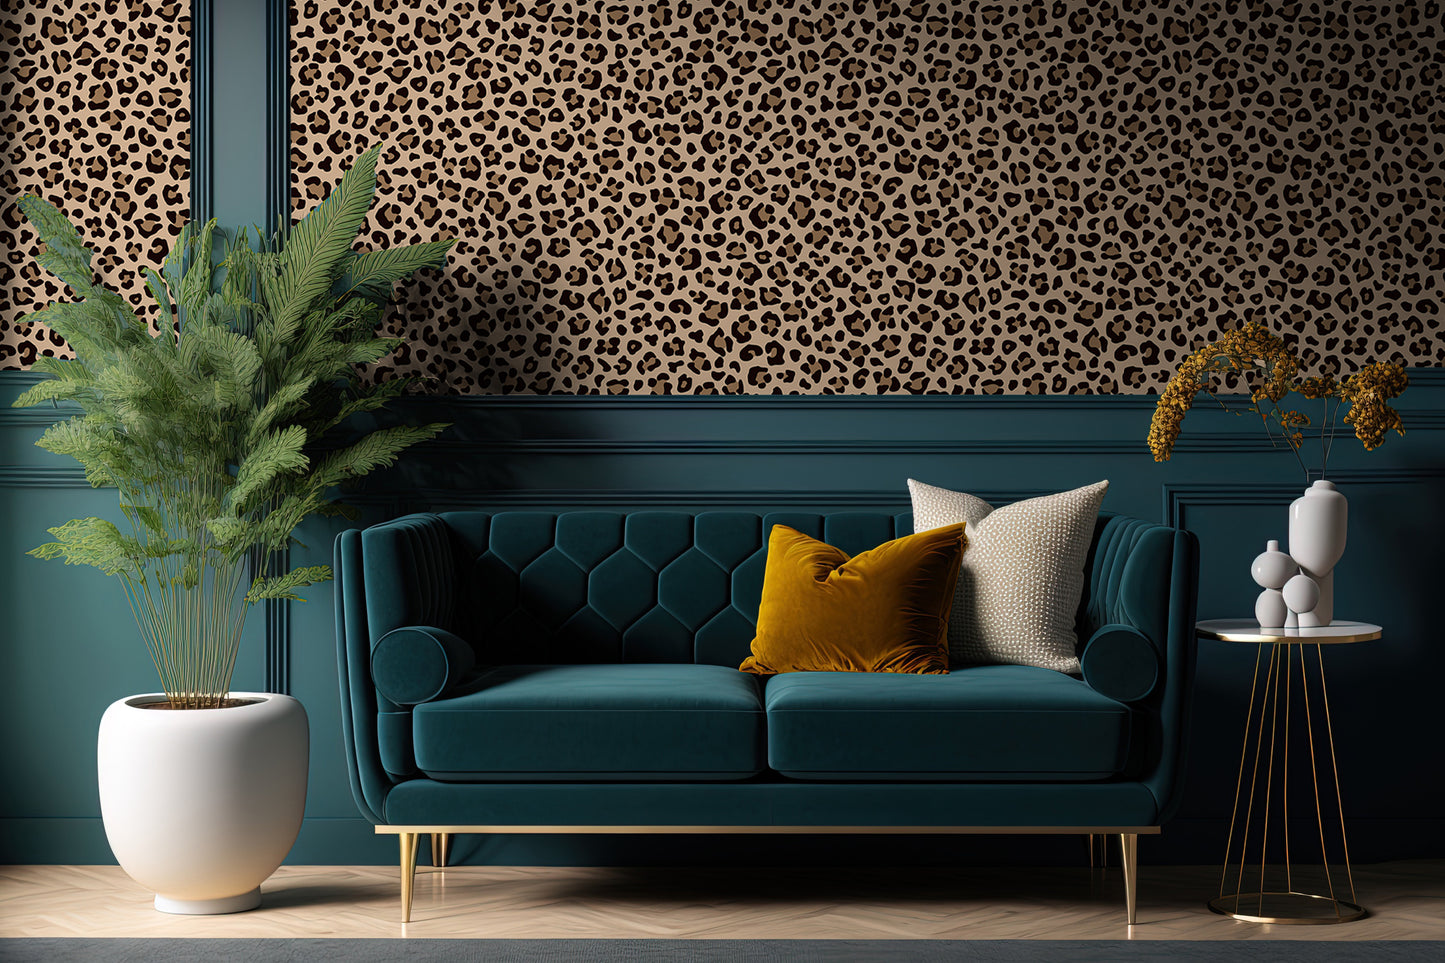 Lazy Leopard Removable Peel And Stick Wallpaper